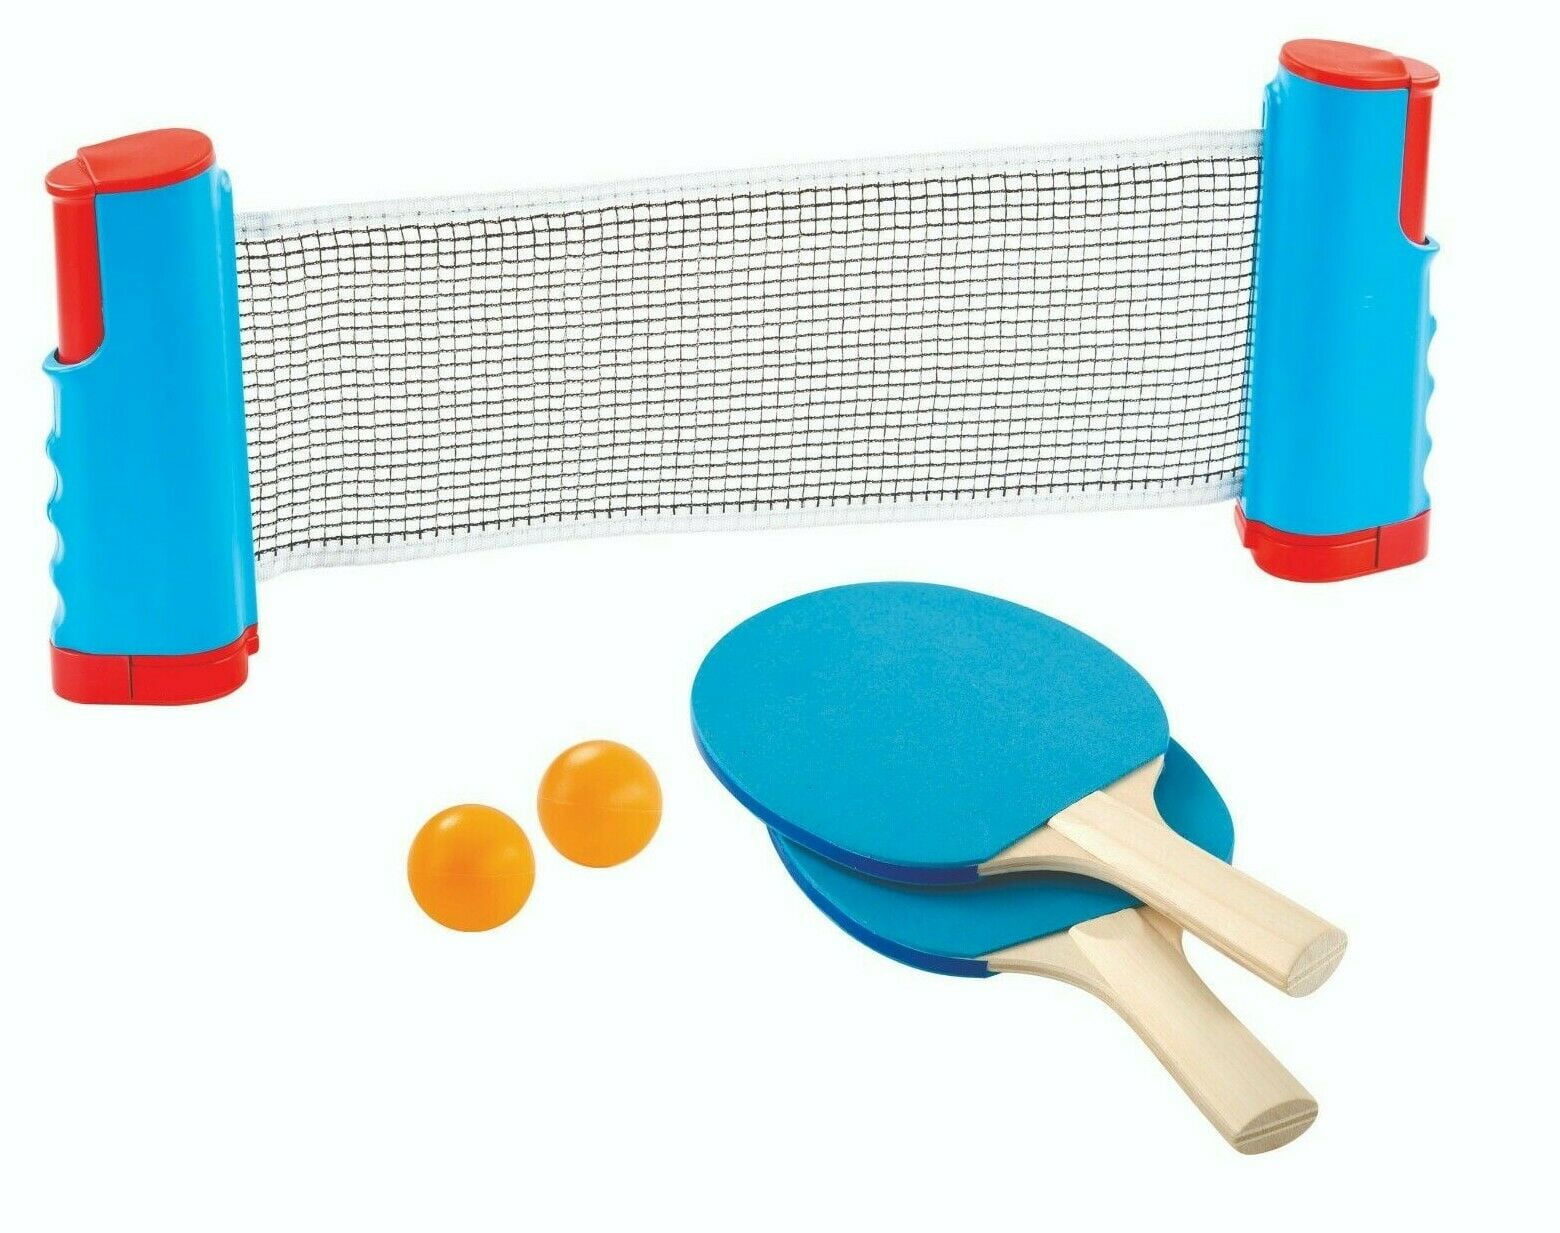 Details about   4 Balls Table Tennis Racket Set Extending Net Table Tennis Net Ping Pong Paddle 